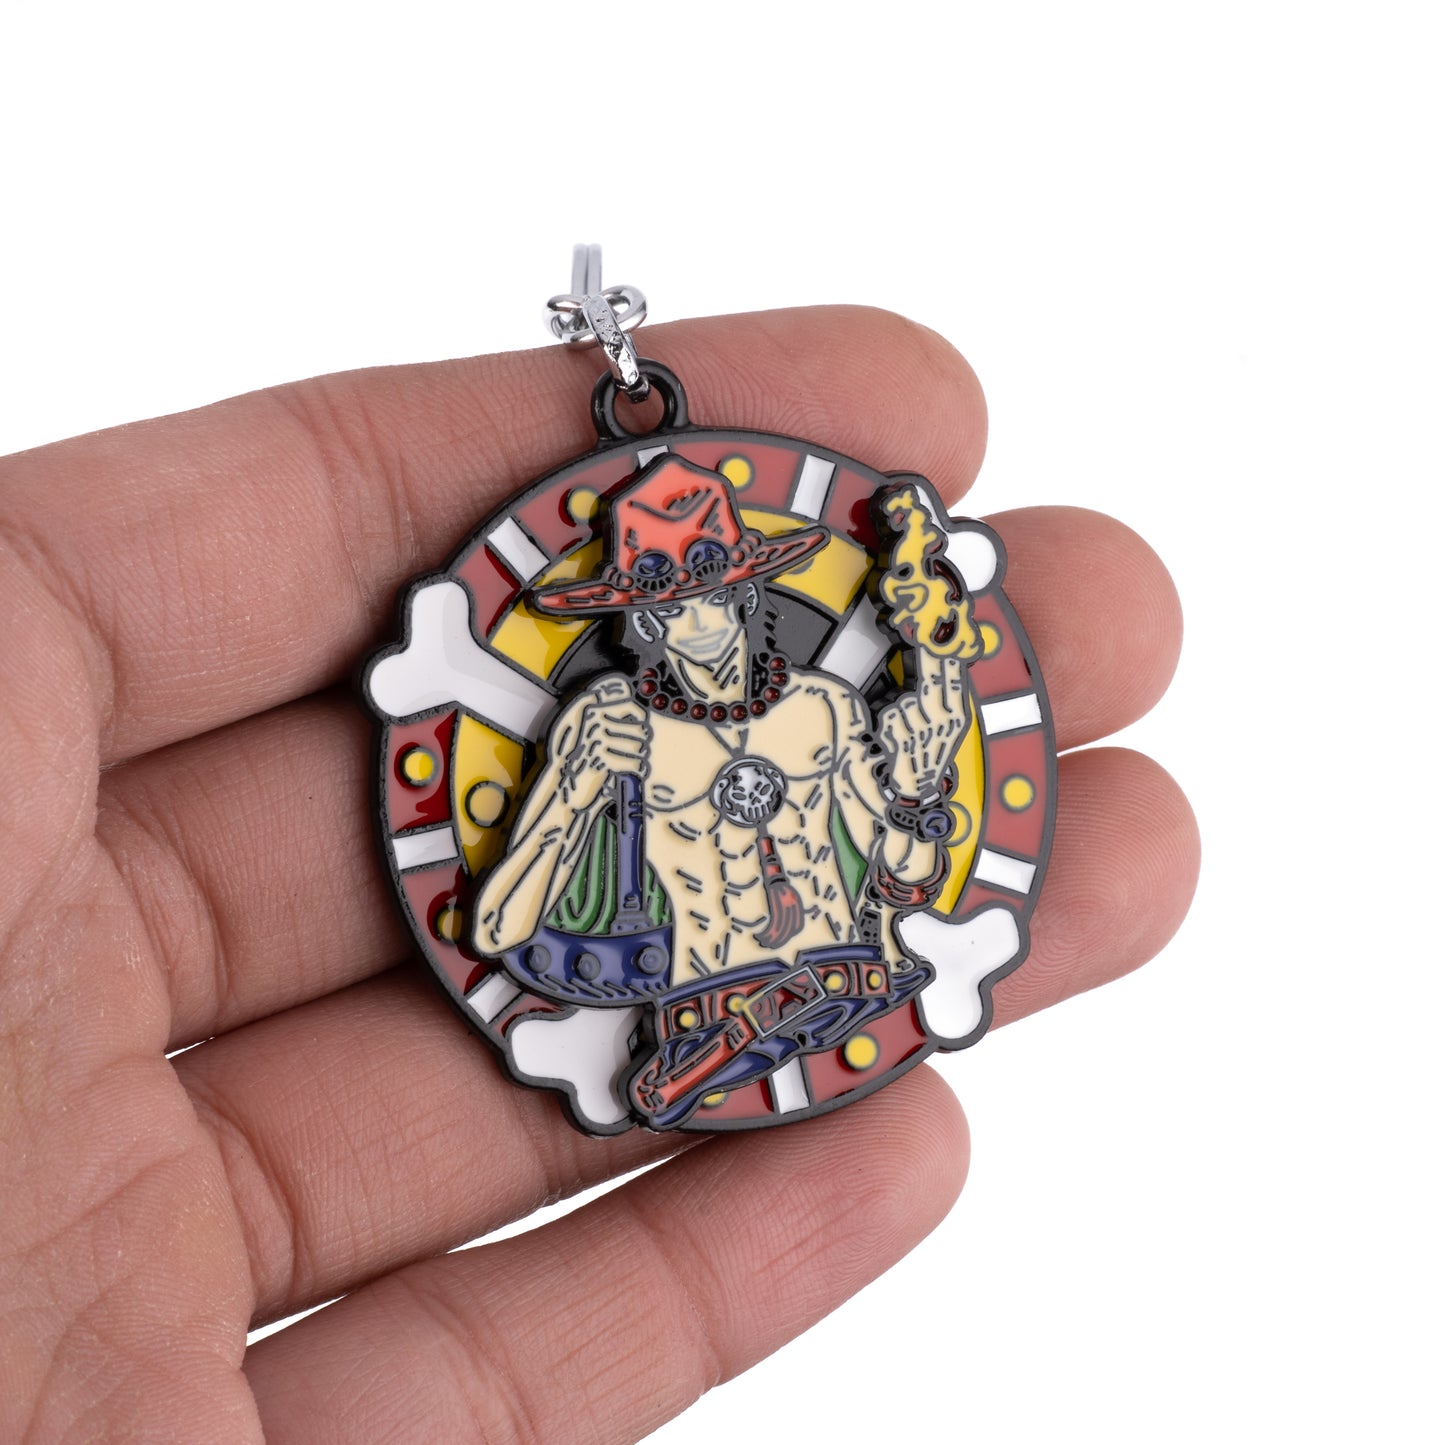 Basket Bum's Rotating Ace Keychain One Piece Flaming Revolve